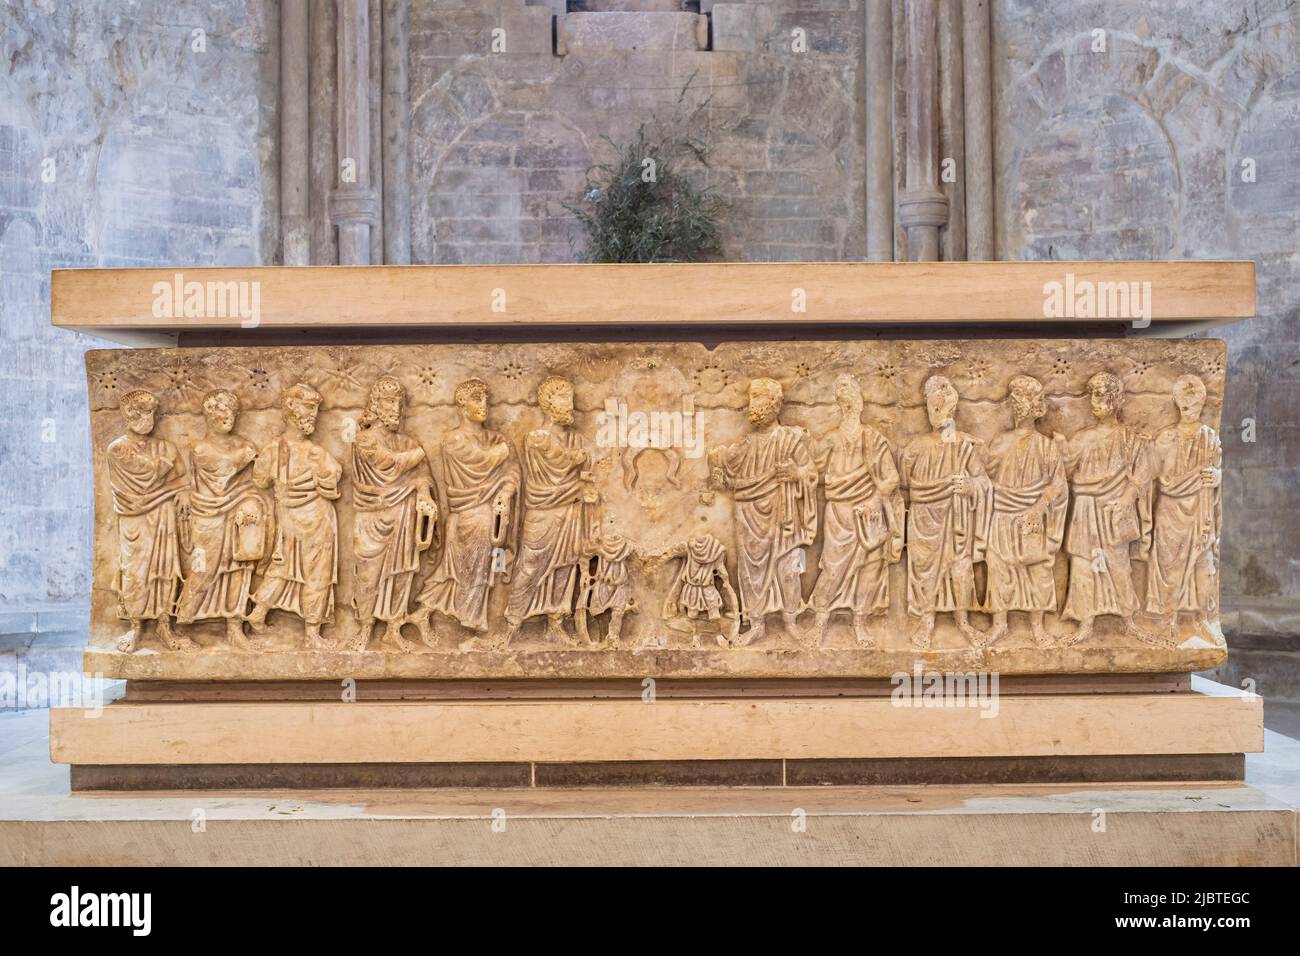 France, Alpes-de-Haute-Provence, Luberon Regional Natural Park, Manosque, Notre-Dame de Romigier church, the main altar is an early Christian sarcophagus in Carrara marble (late 4th century-early 5th century) Stock Photo